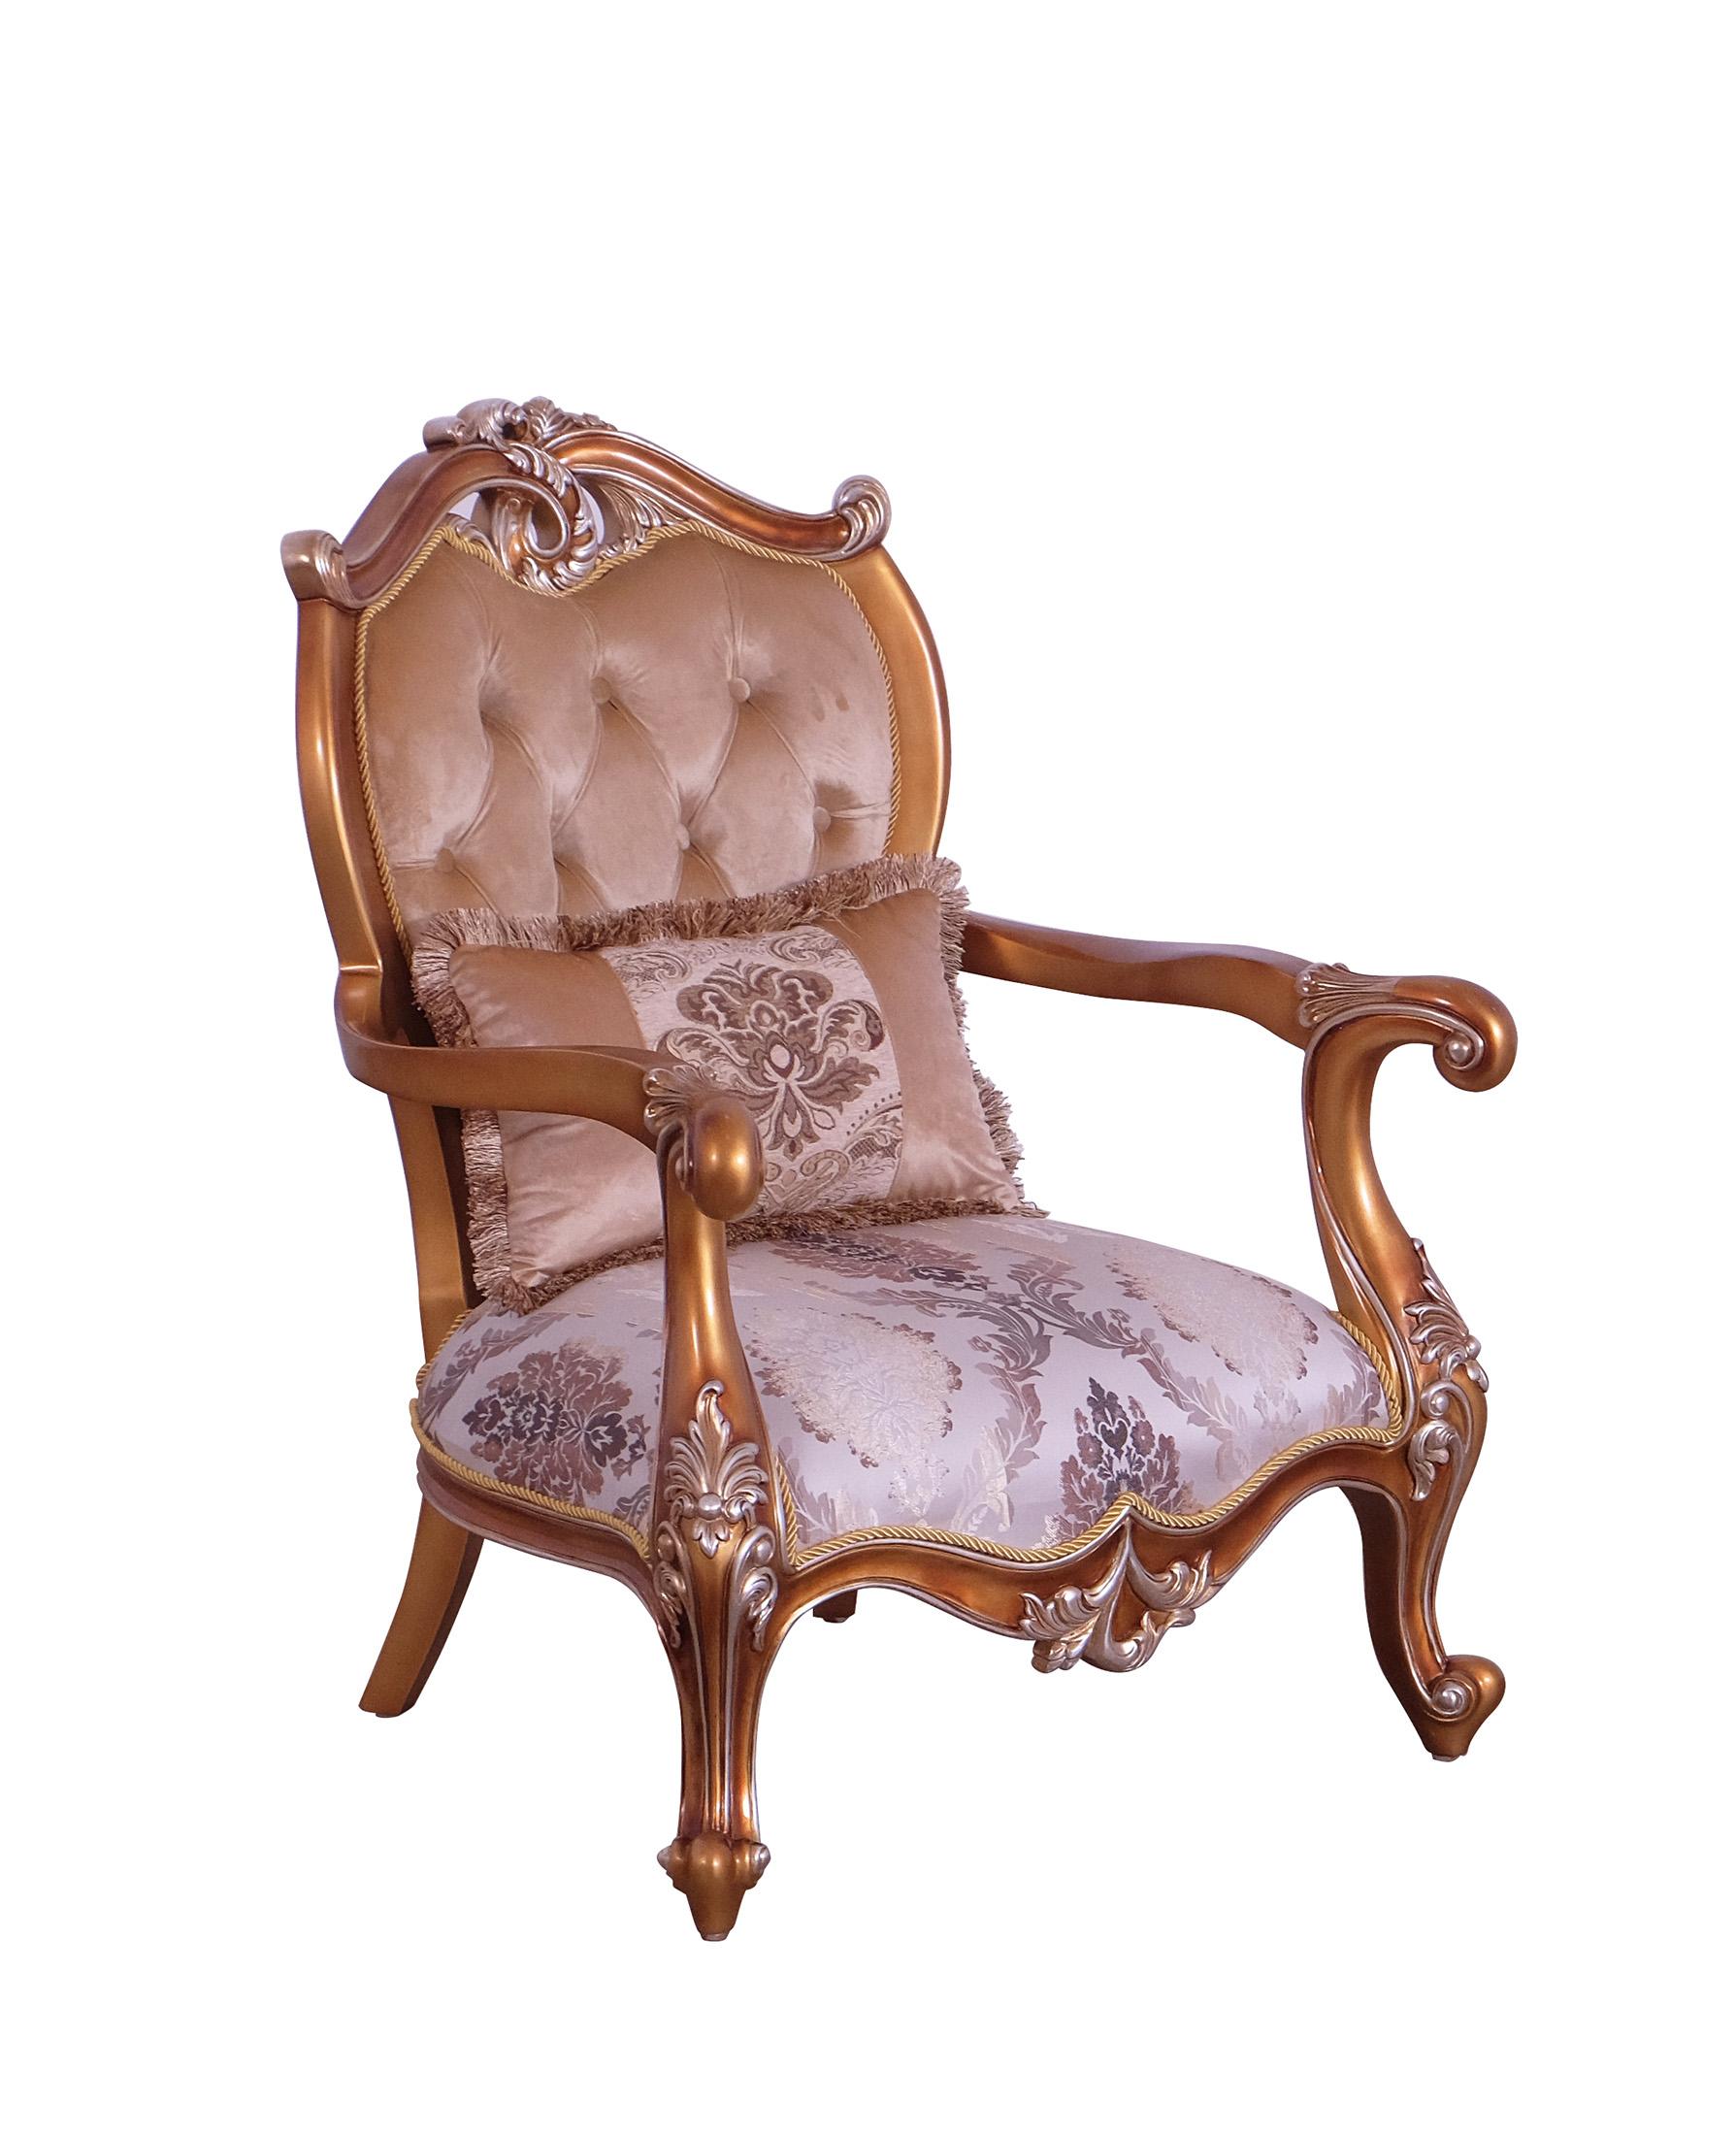 Classic, Traditional Arm Chair AUGUSTUS II 37059-C in Sand, Gold, Black Fabric